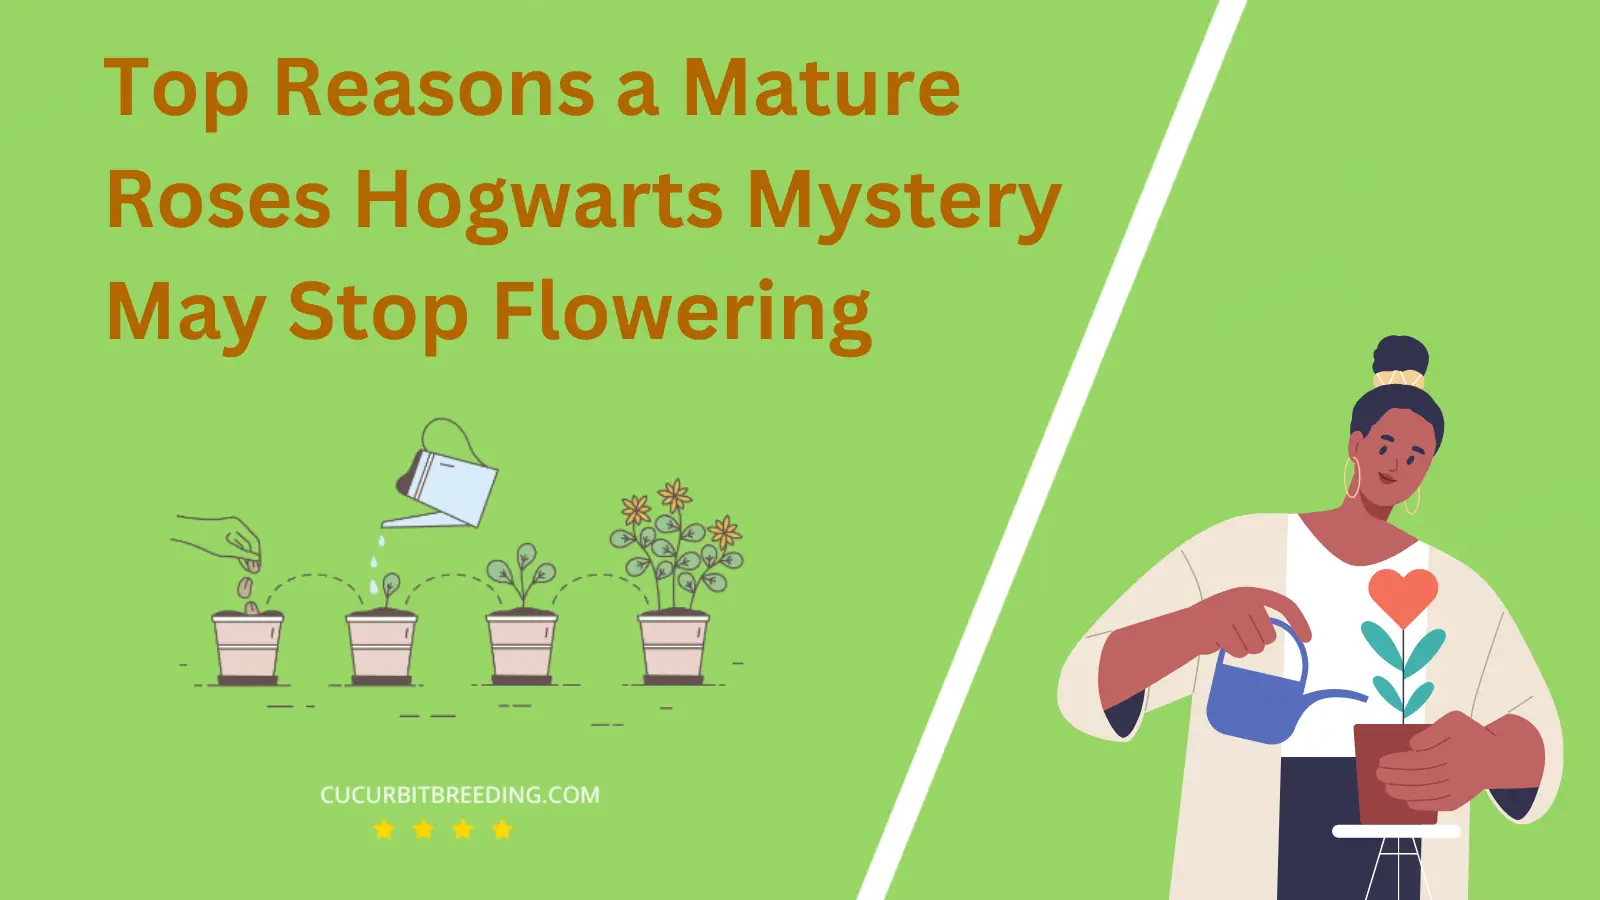 Top Reasons a Mature Roses Hogwarts Mystery May Stop Flowering